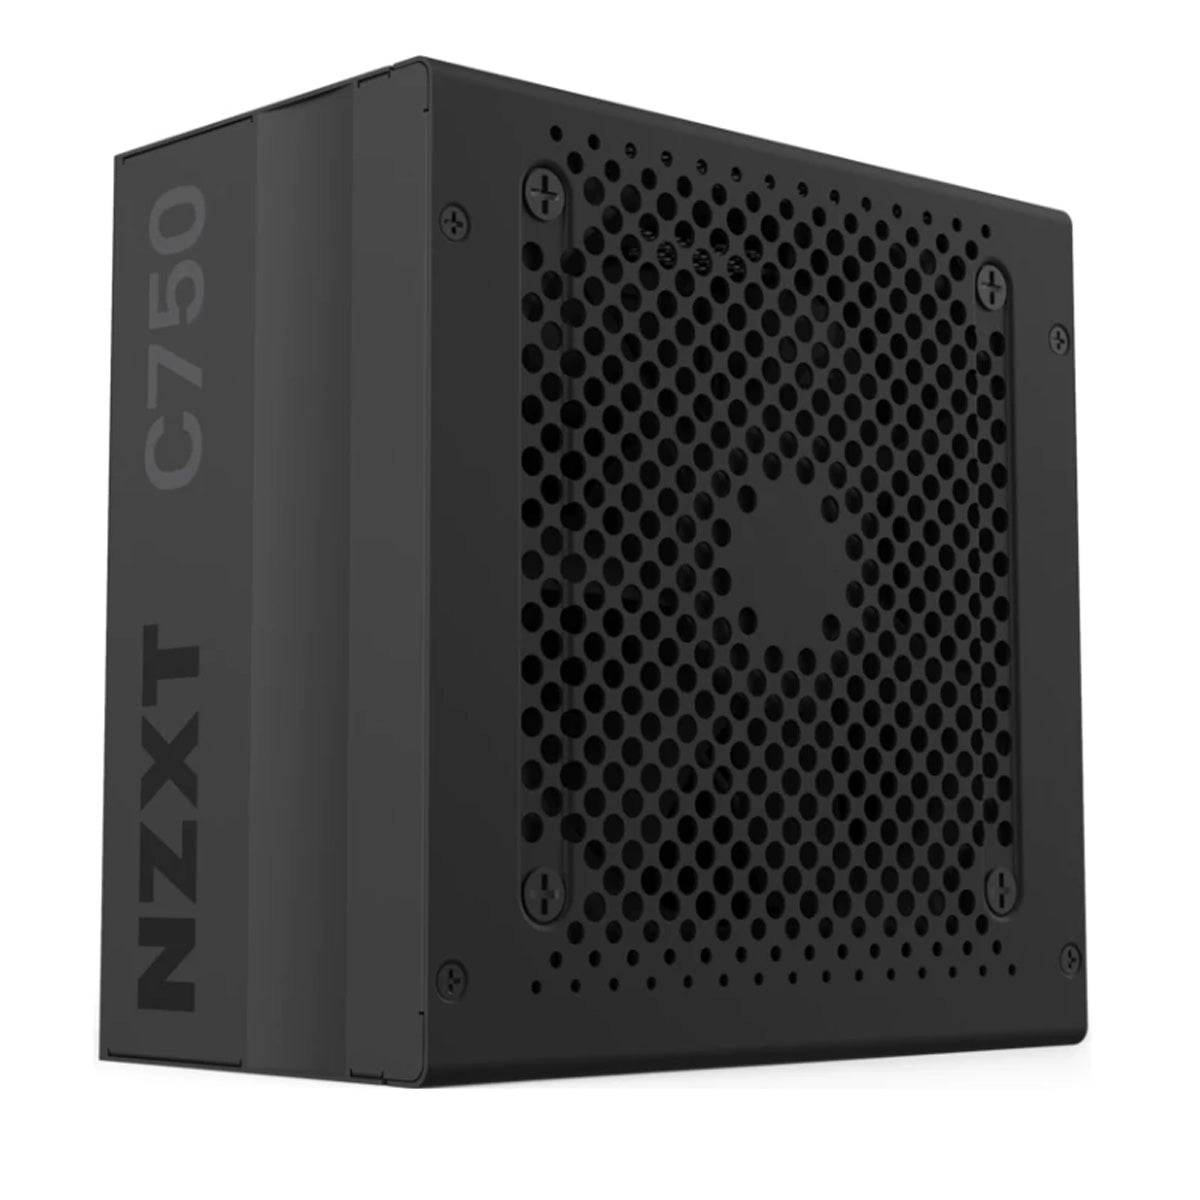 NZXT C750 750W 80 Plus Gold Full Modular Gaming Power Supply SMPS